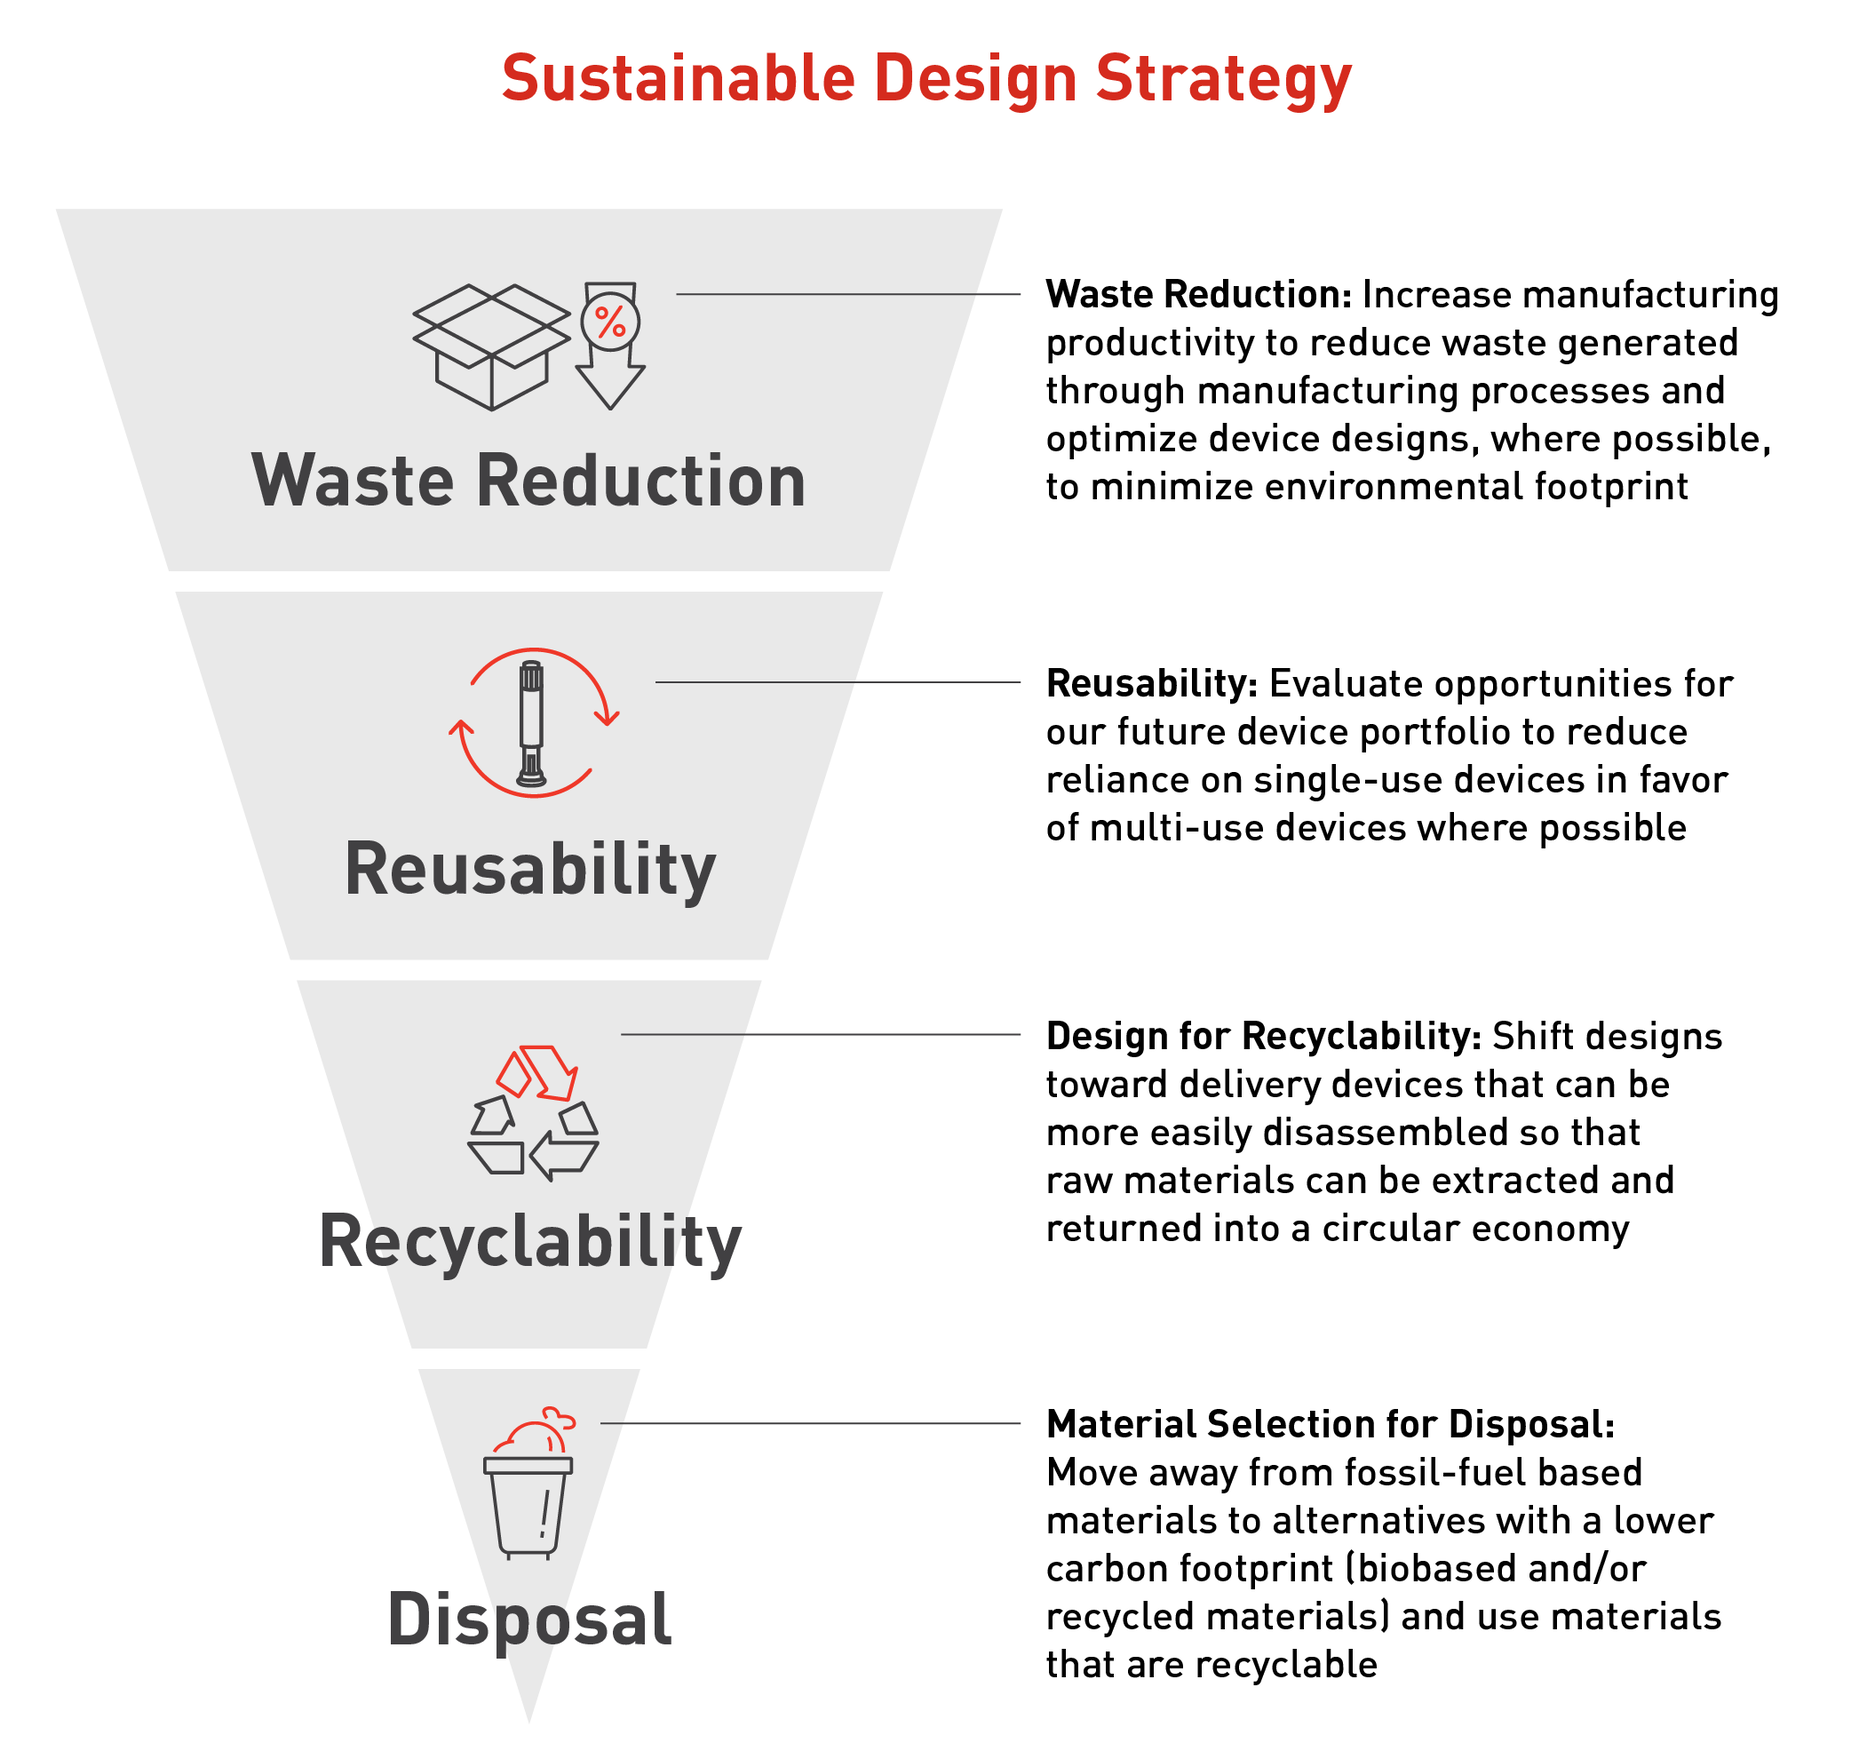 Waste Reduction hierarchy